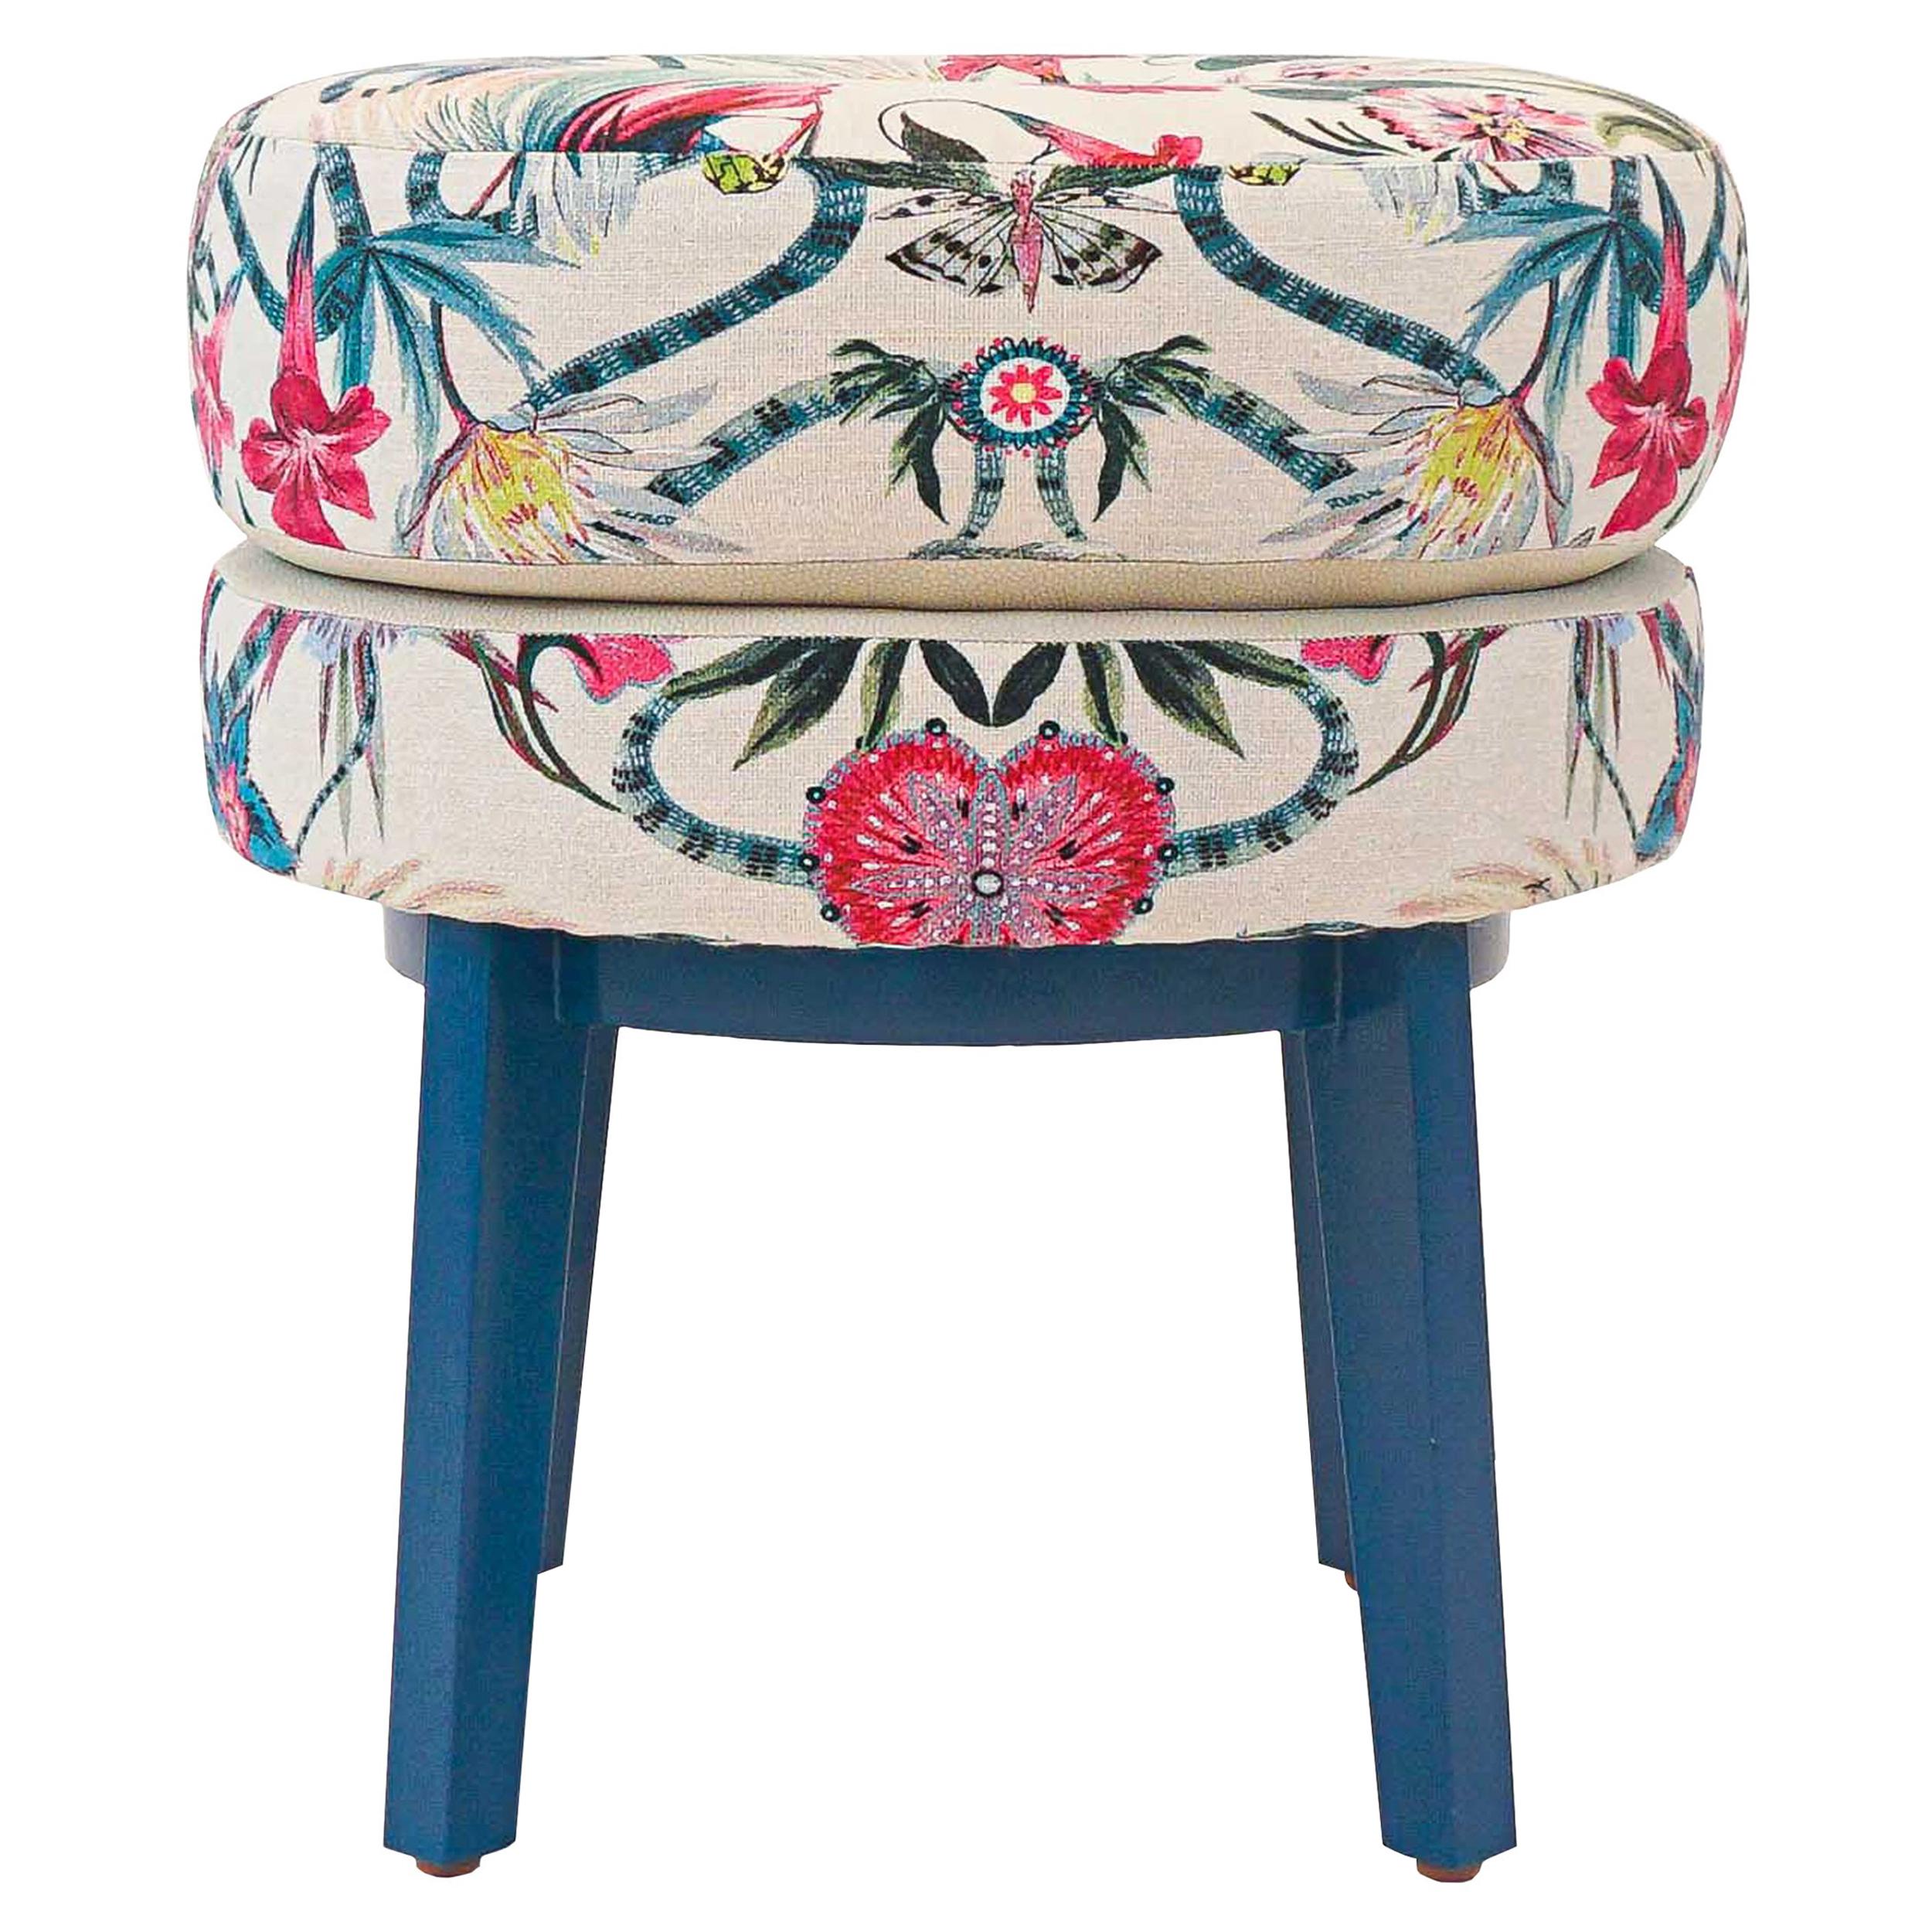 Floral Print Small Round Stool For Sale